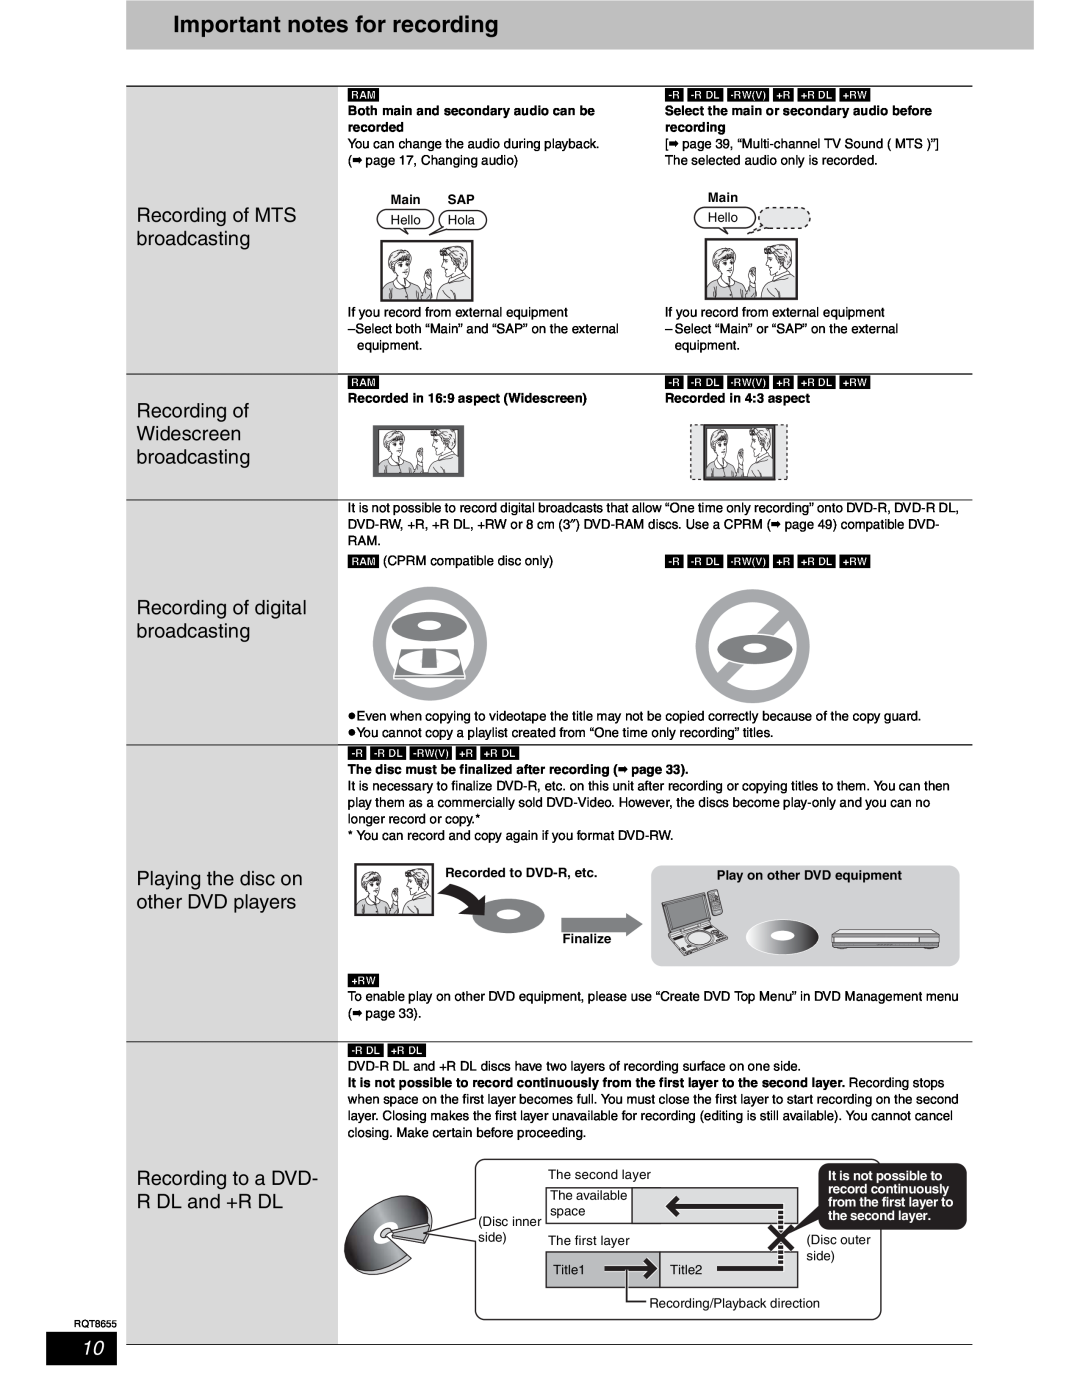 Panasonic SC-RT50 Important notes for recording, Recording of MTS broadcasting, Recording of Widescreen broadcasting 